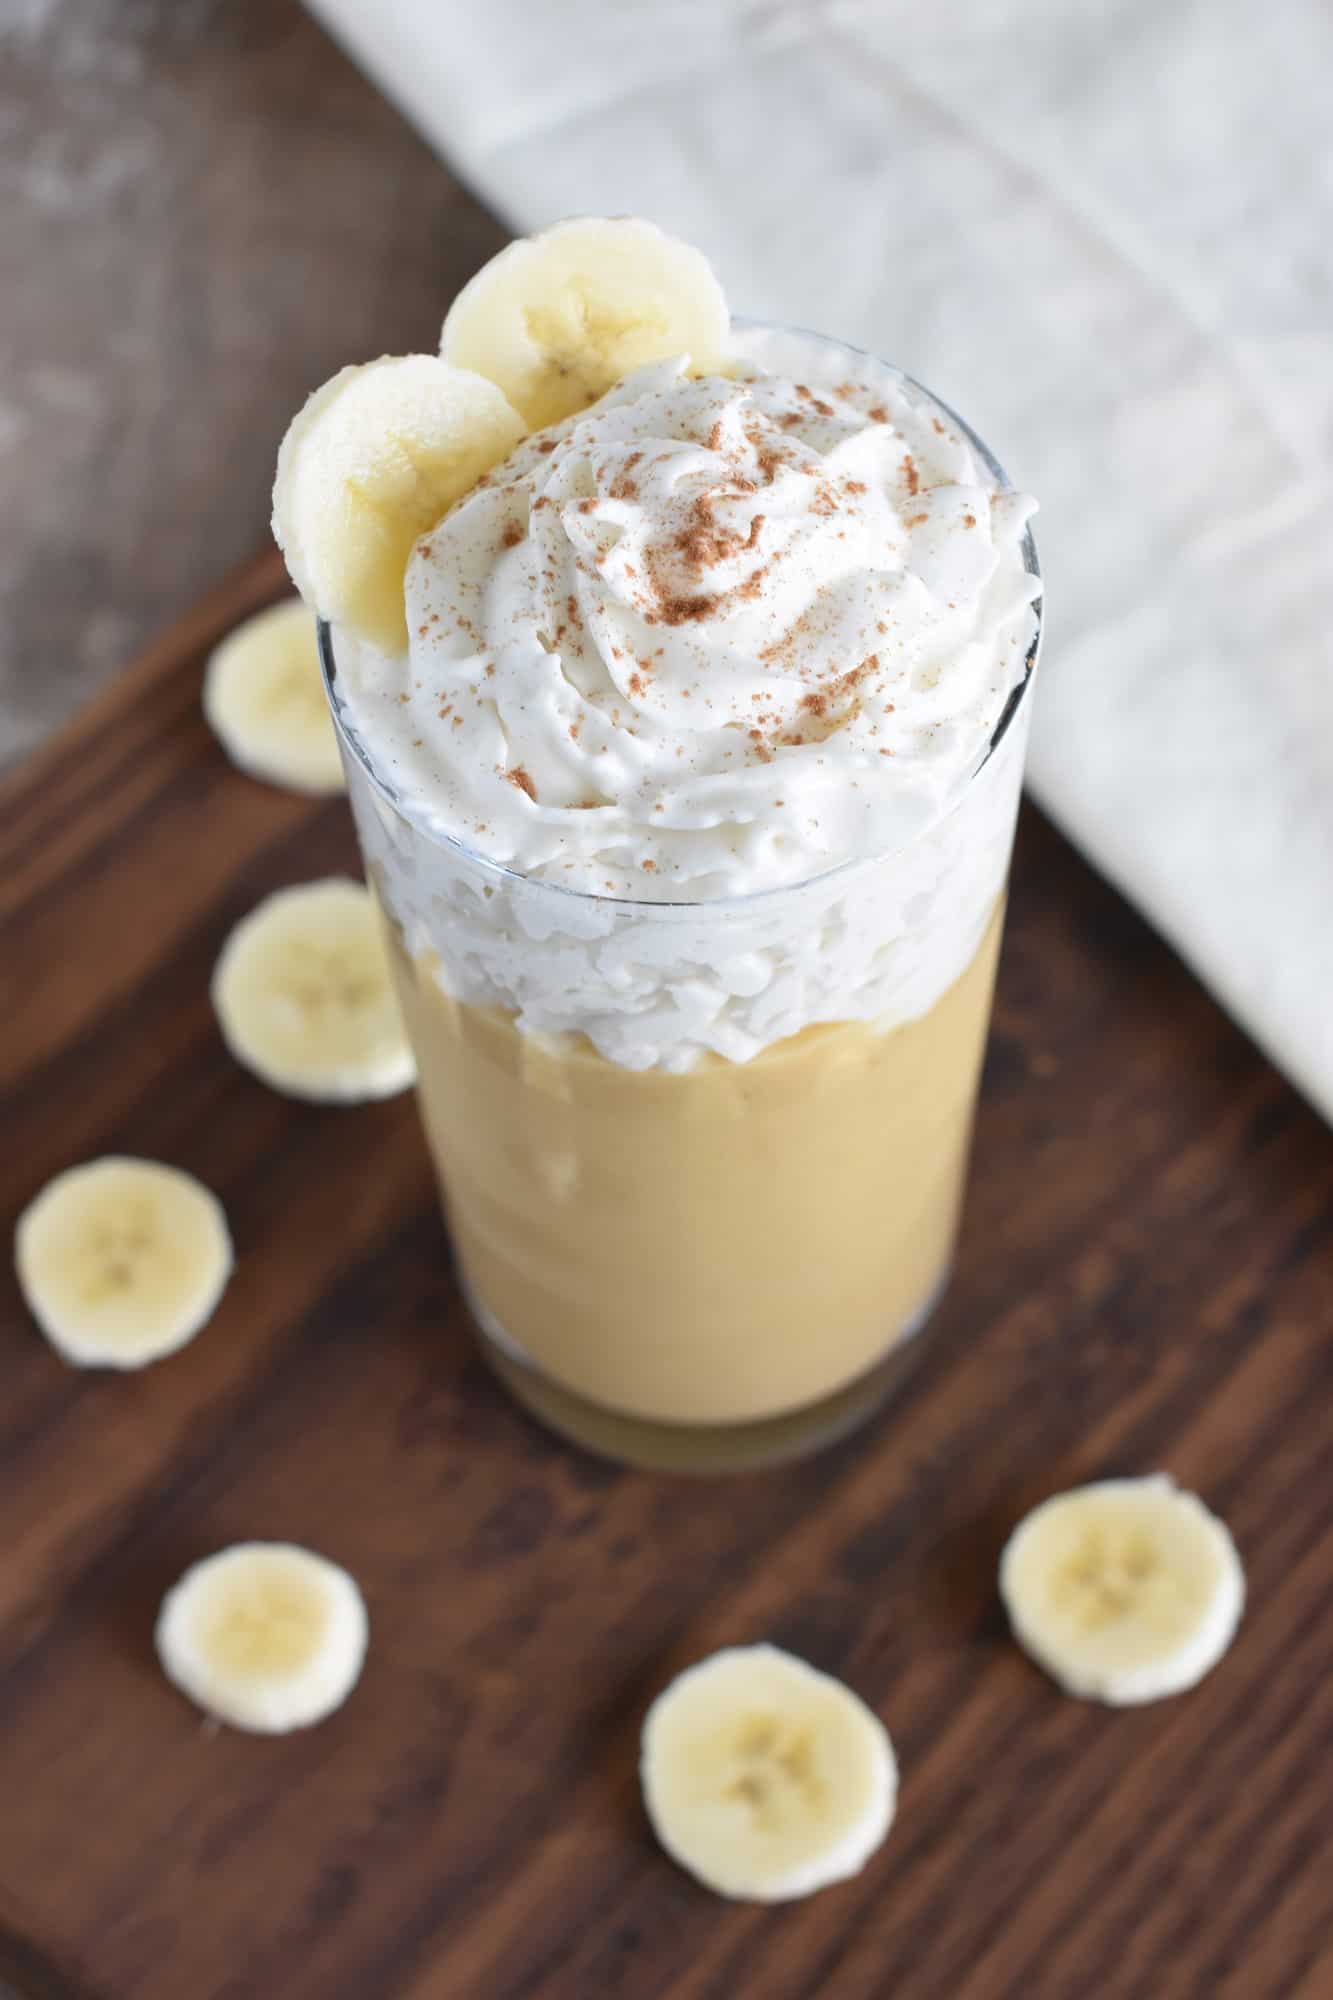 smoothie topped with dairy-free whipped topping, cinnamon and banana slices